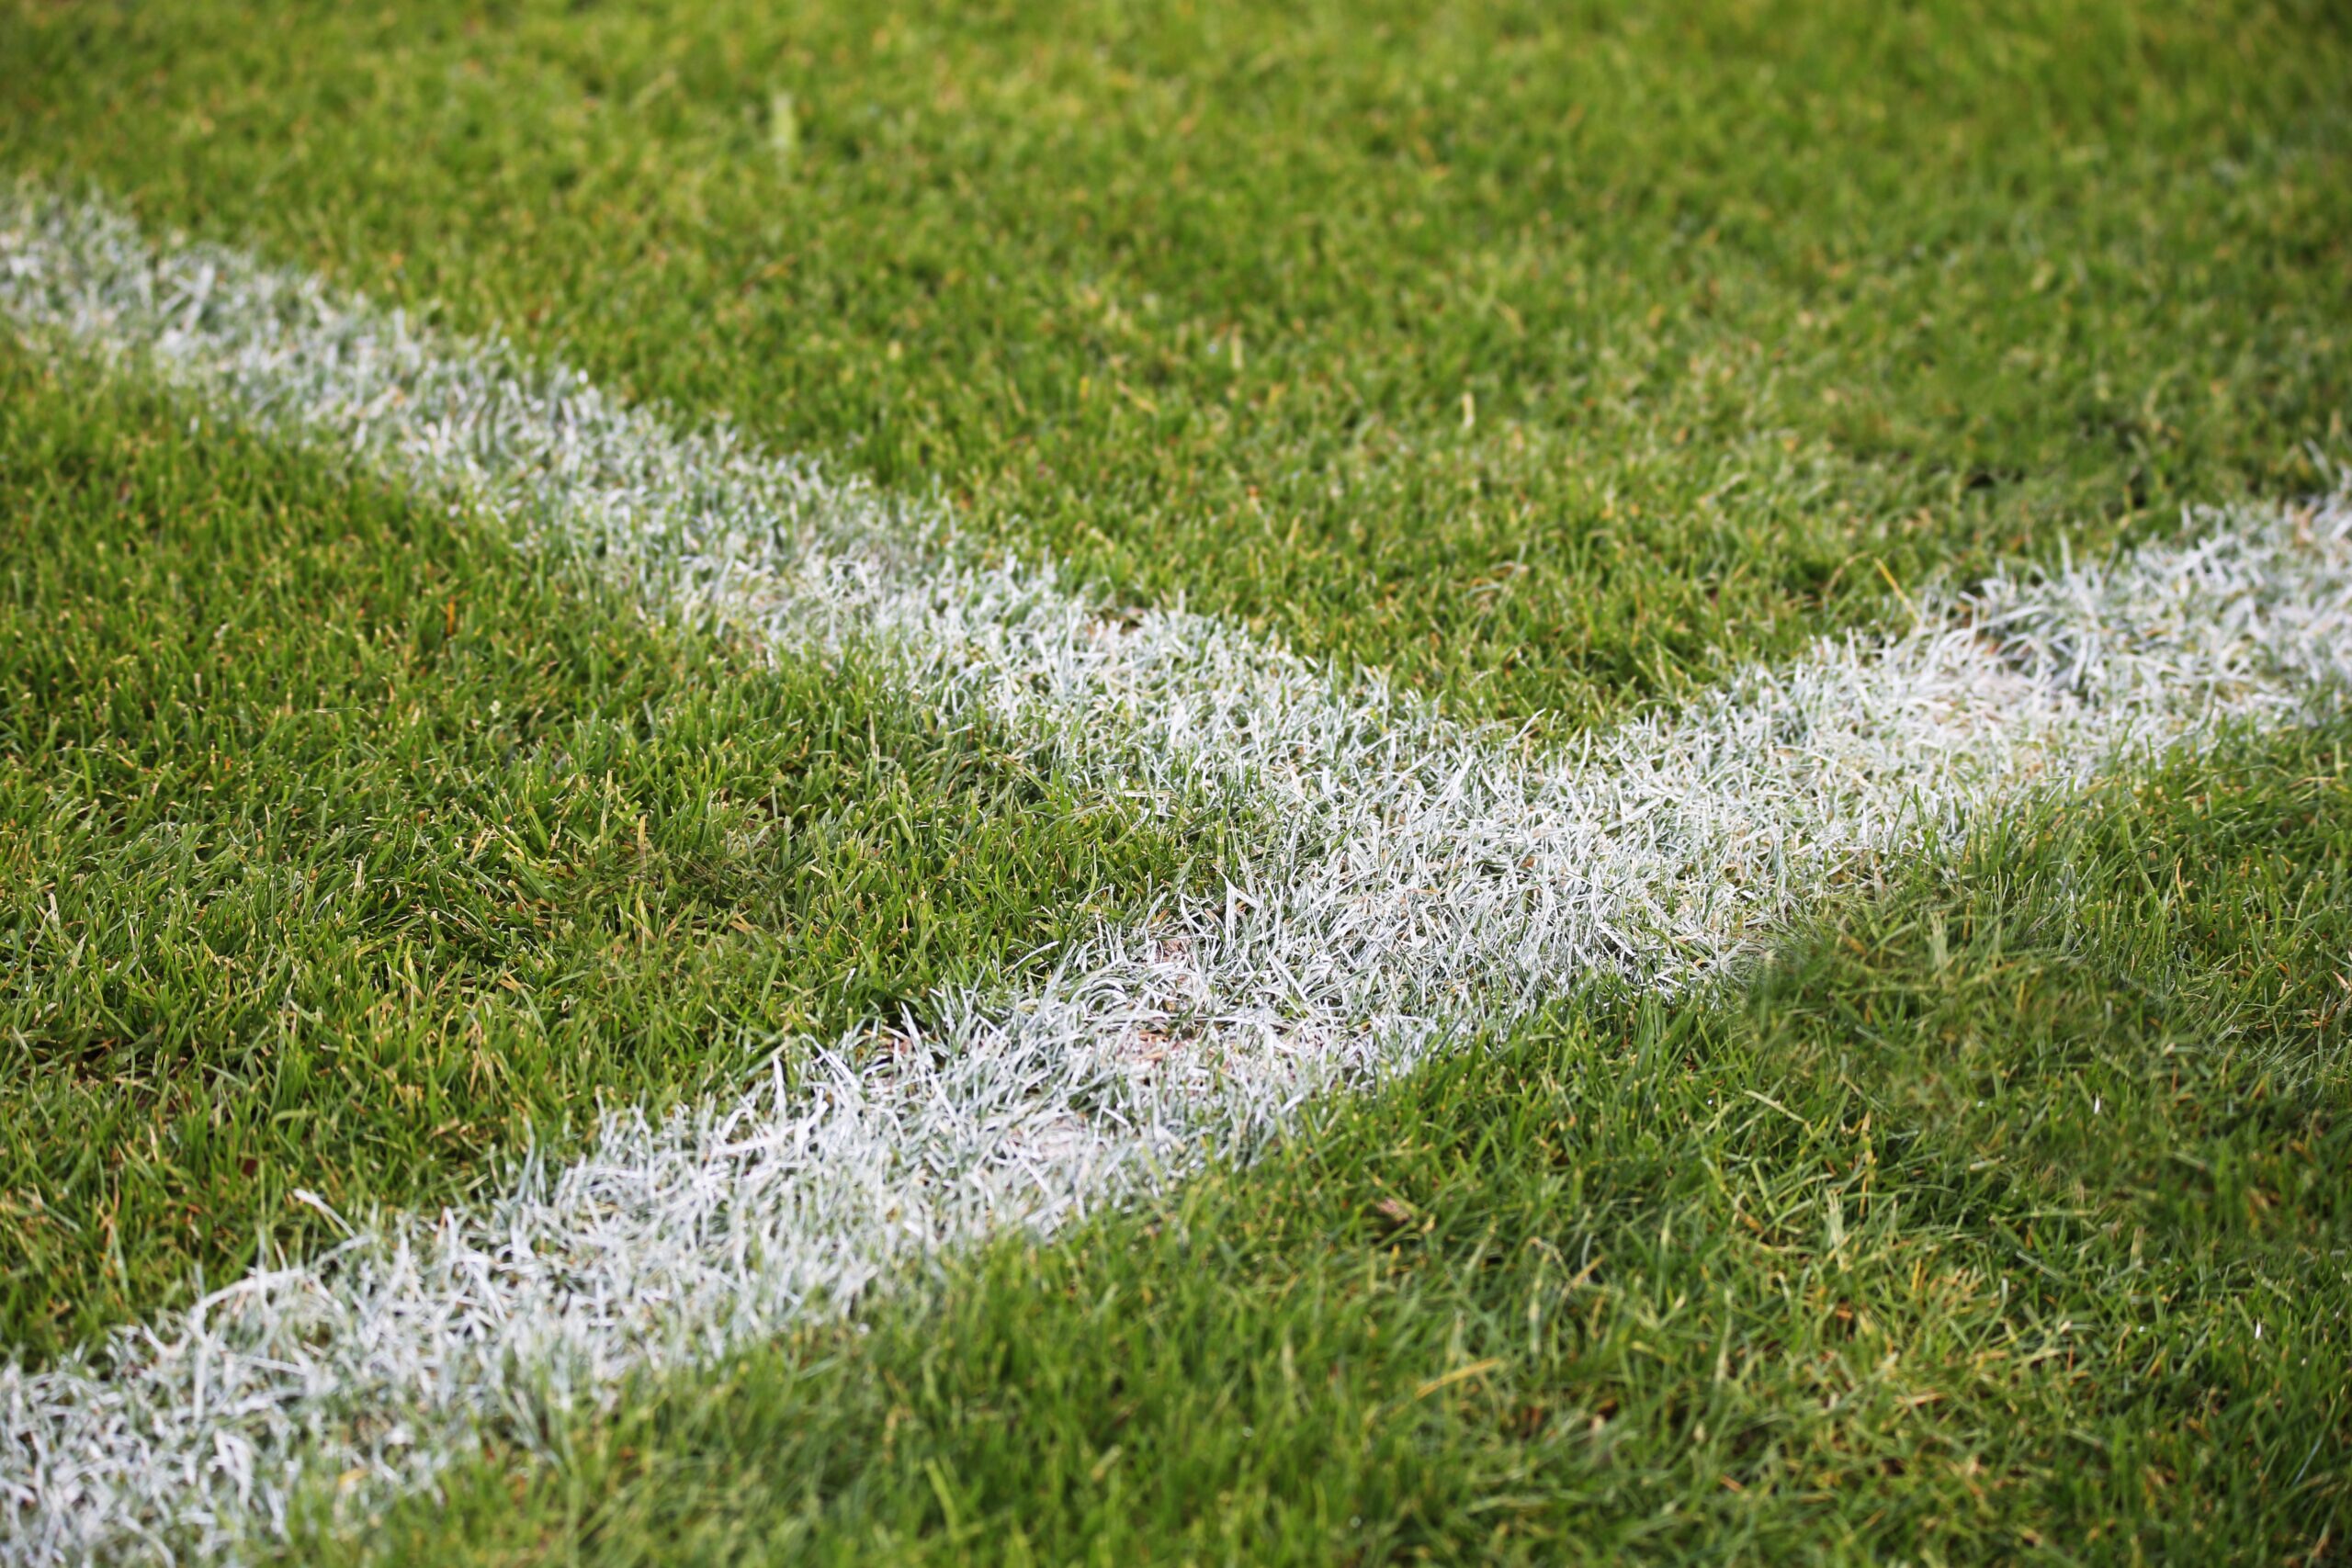 Football Turf Price: Options, Factors, and Tradeoffs - Gallant Sports